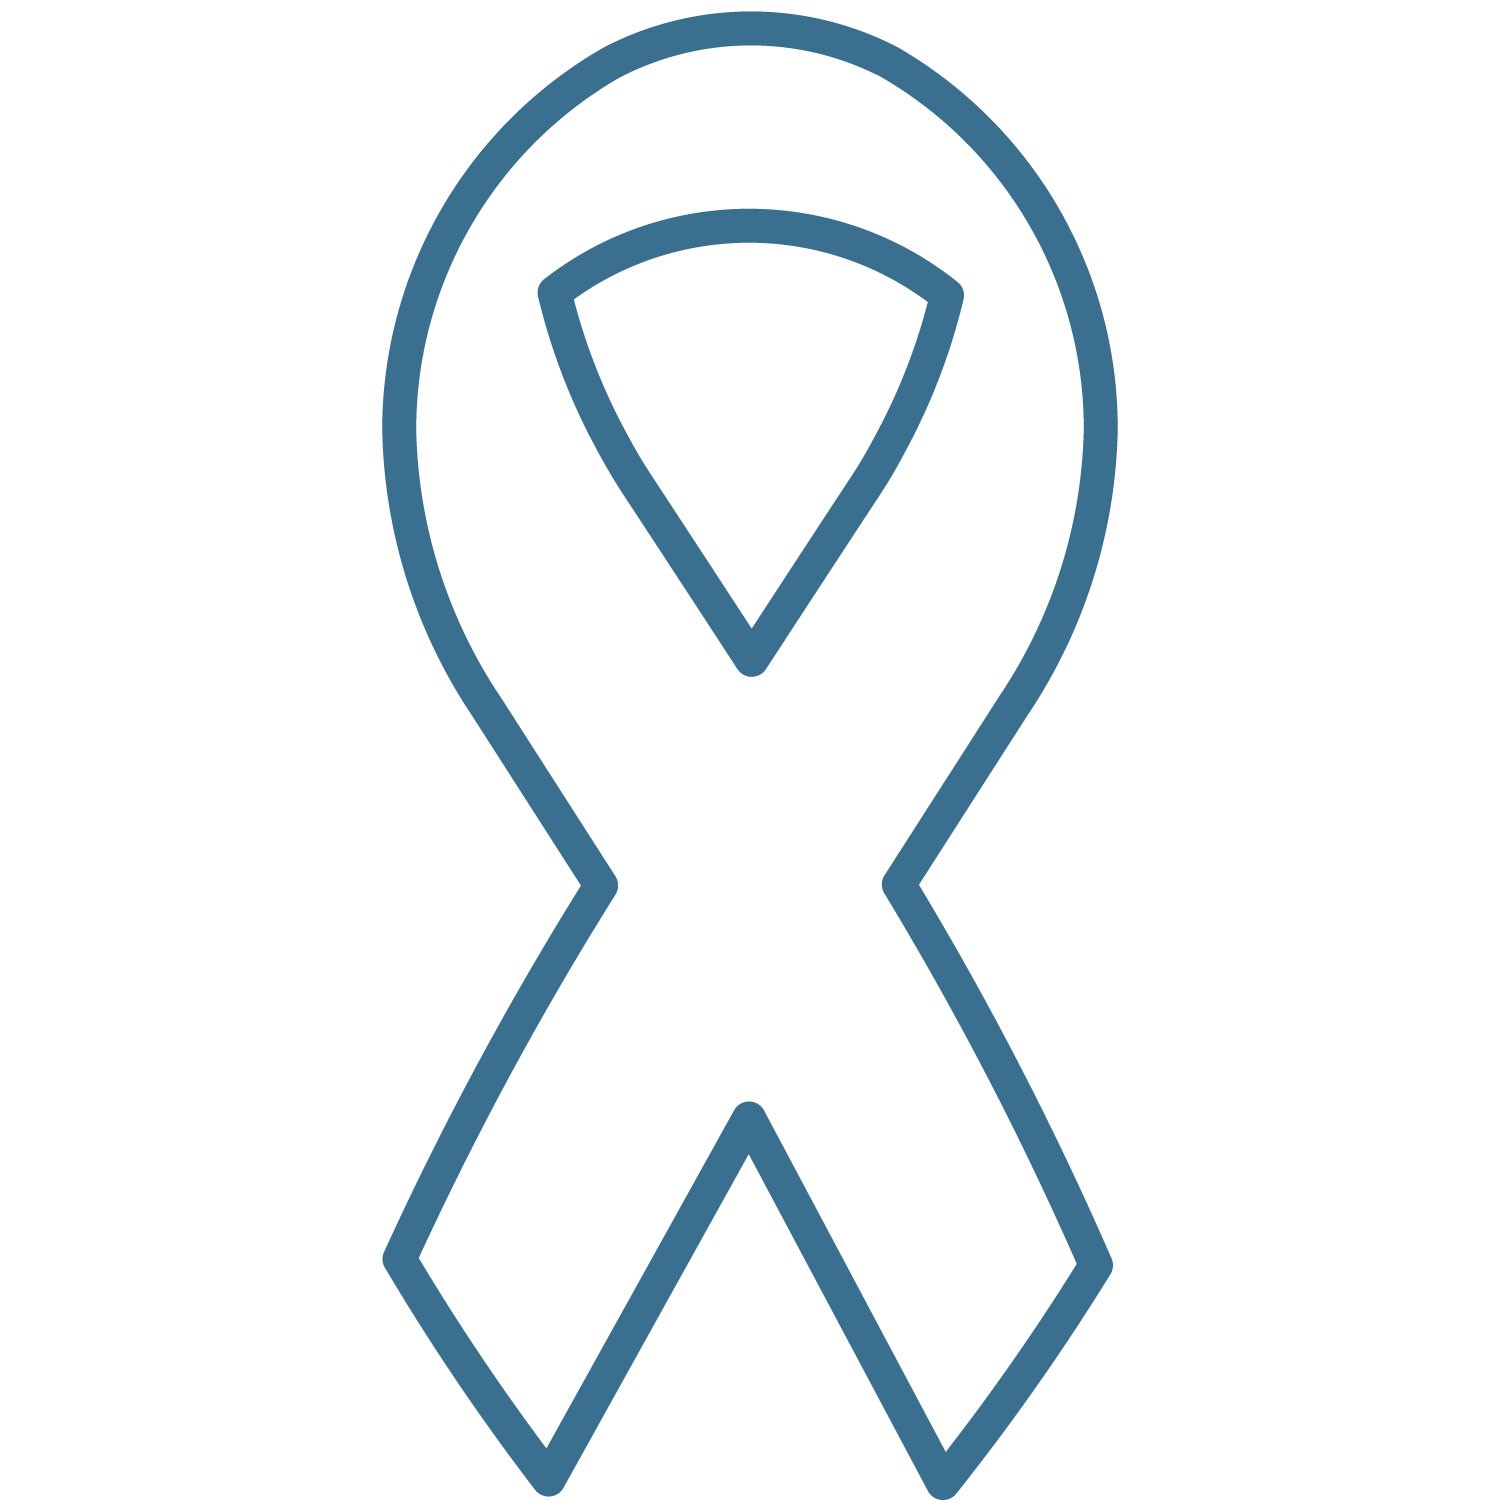 Clipart of Cancer Awareness Ribbon free image.